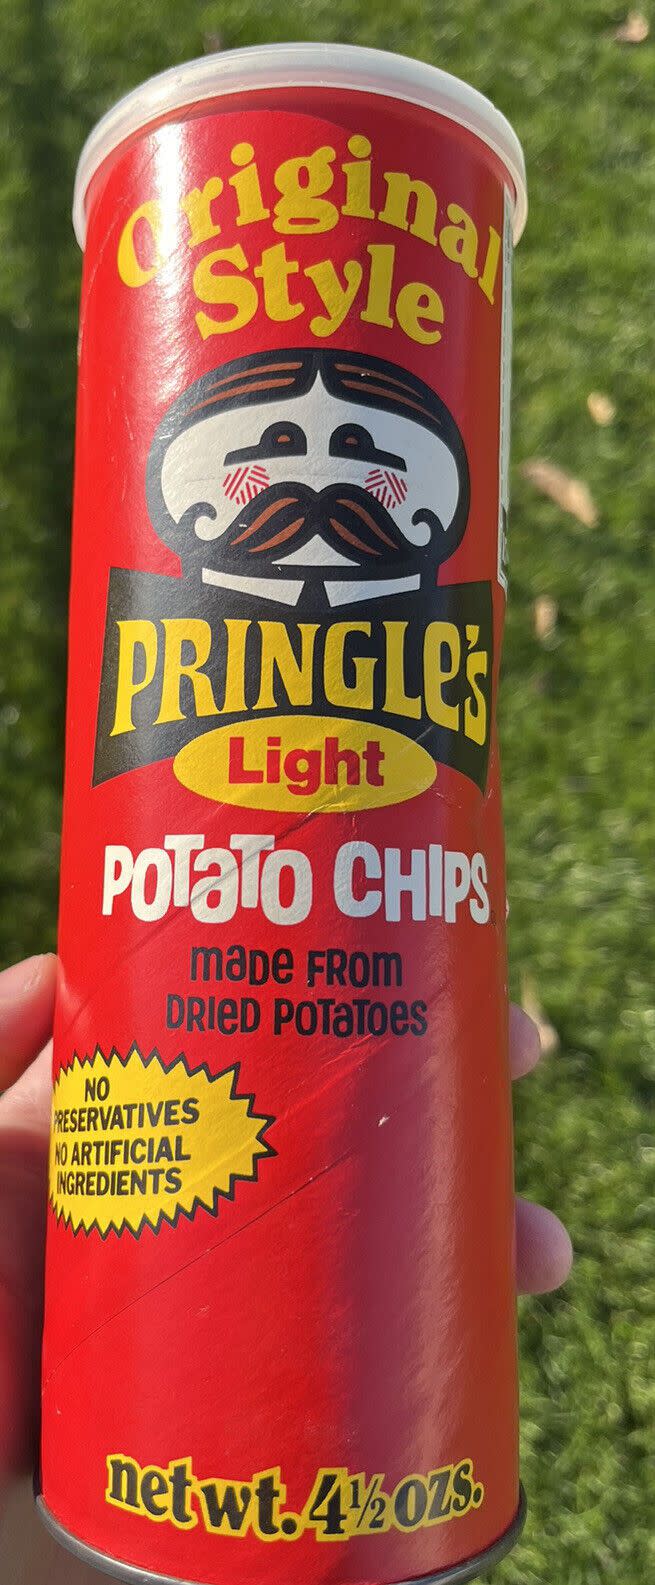 1970's vintage original style Pringles Light potato chips can 4.5 oz., left hand holding the red can, grass blurred in the background